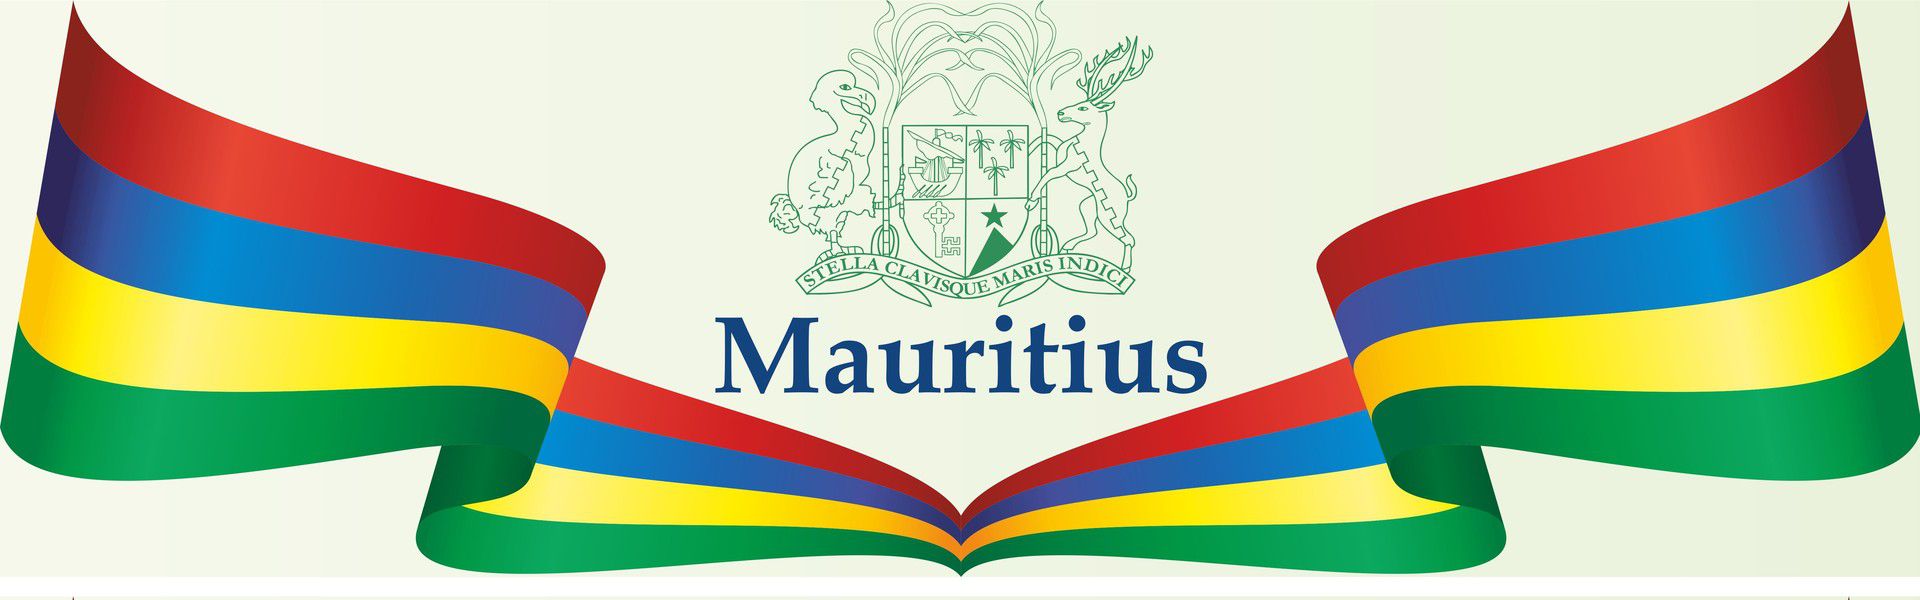 We have described Mauritius to you; its attributes in terms of its landscape, its towns, the activities which can be enjoyed here and prestigious properties which can be bought here. What about its fiscal laws? Is the island as pleasing to the wallet as it is to the eyes and heart? Here is an overview of the fiscal laws of this beautiful island. Spoiler alert: they are very advantageous!